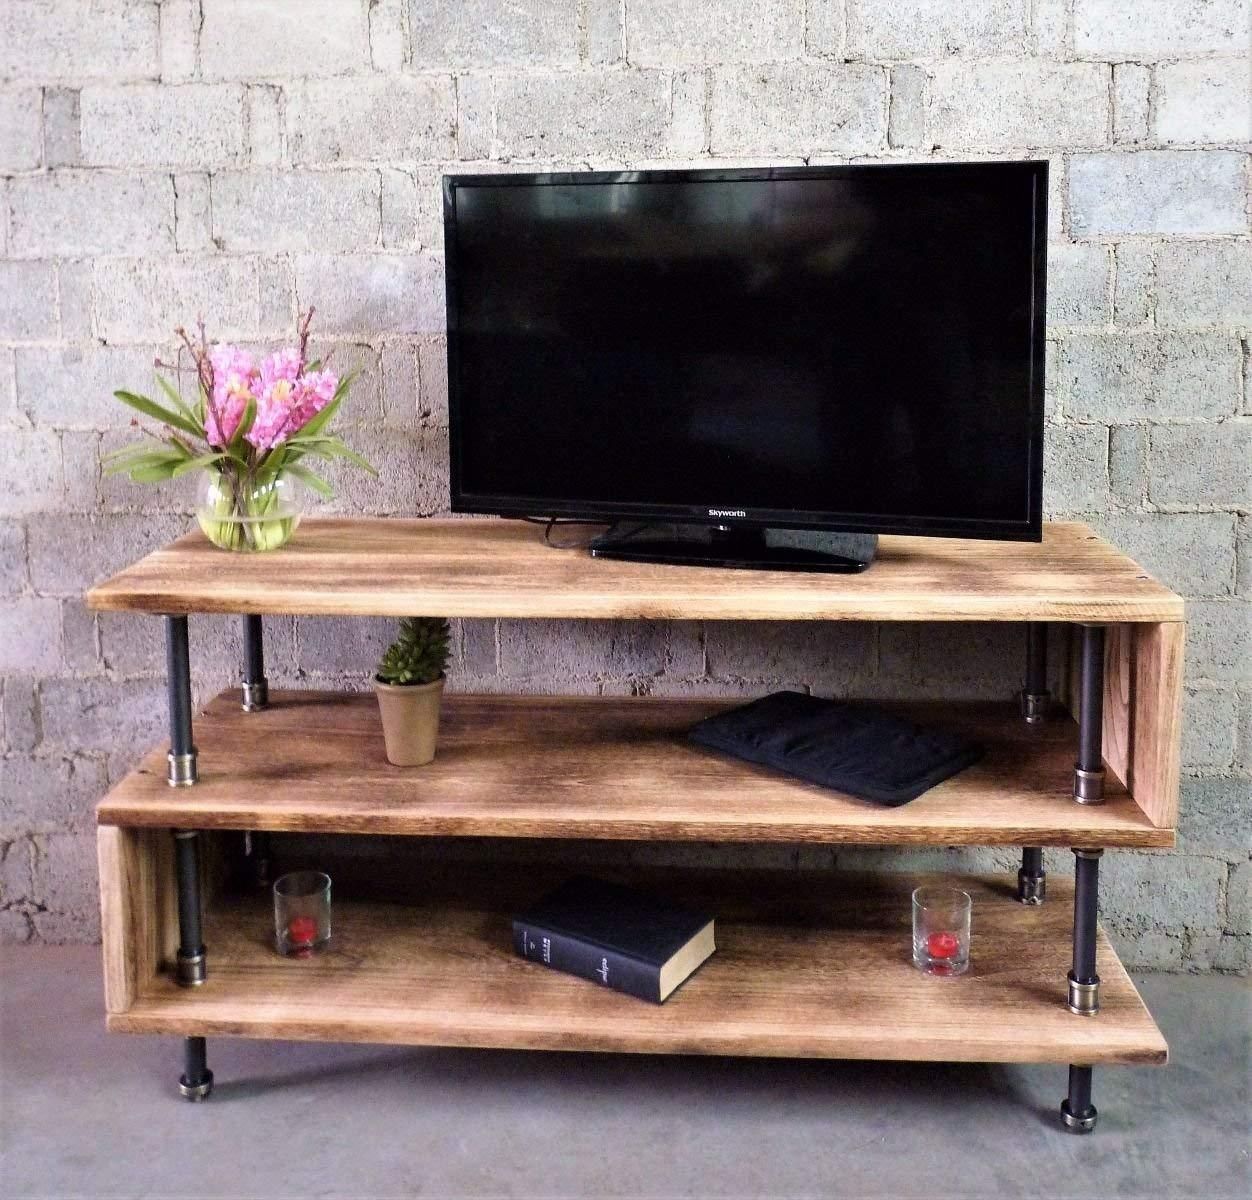 Tucson Modern Industrial Tv Stand – Onlinegnrlstore | Tv In Contemporary Wood Tv Stands (View 8 of 15)